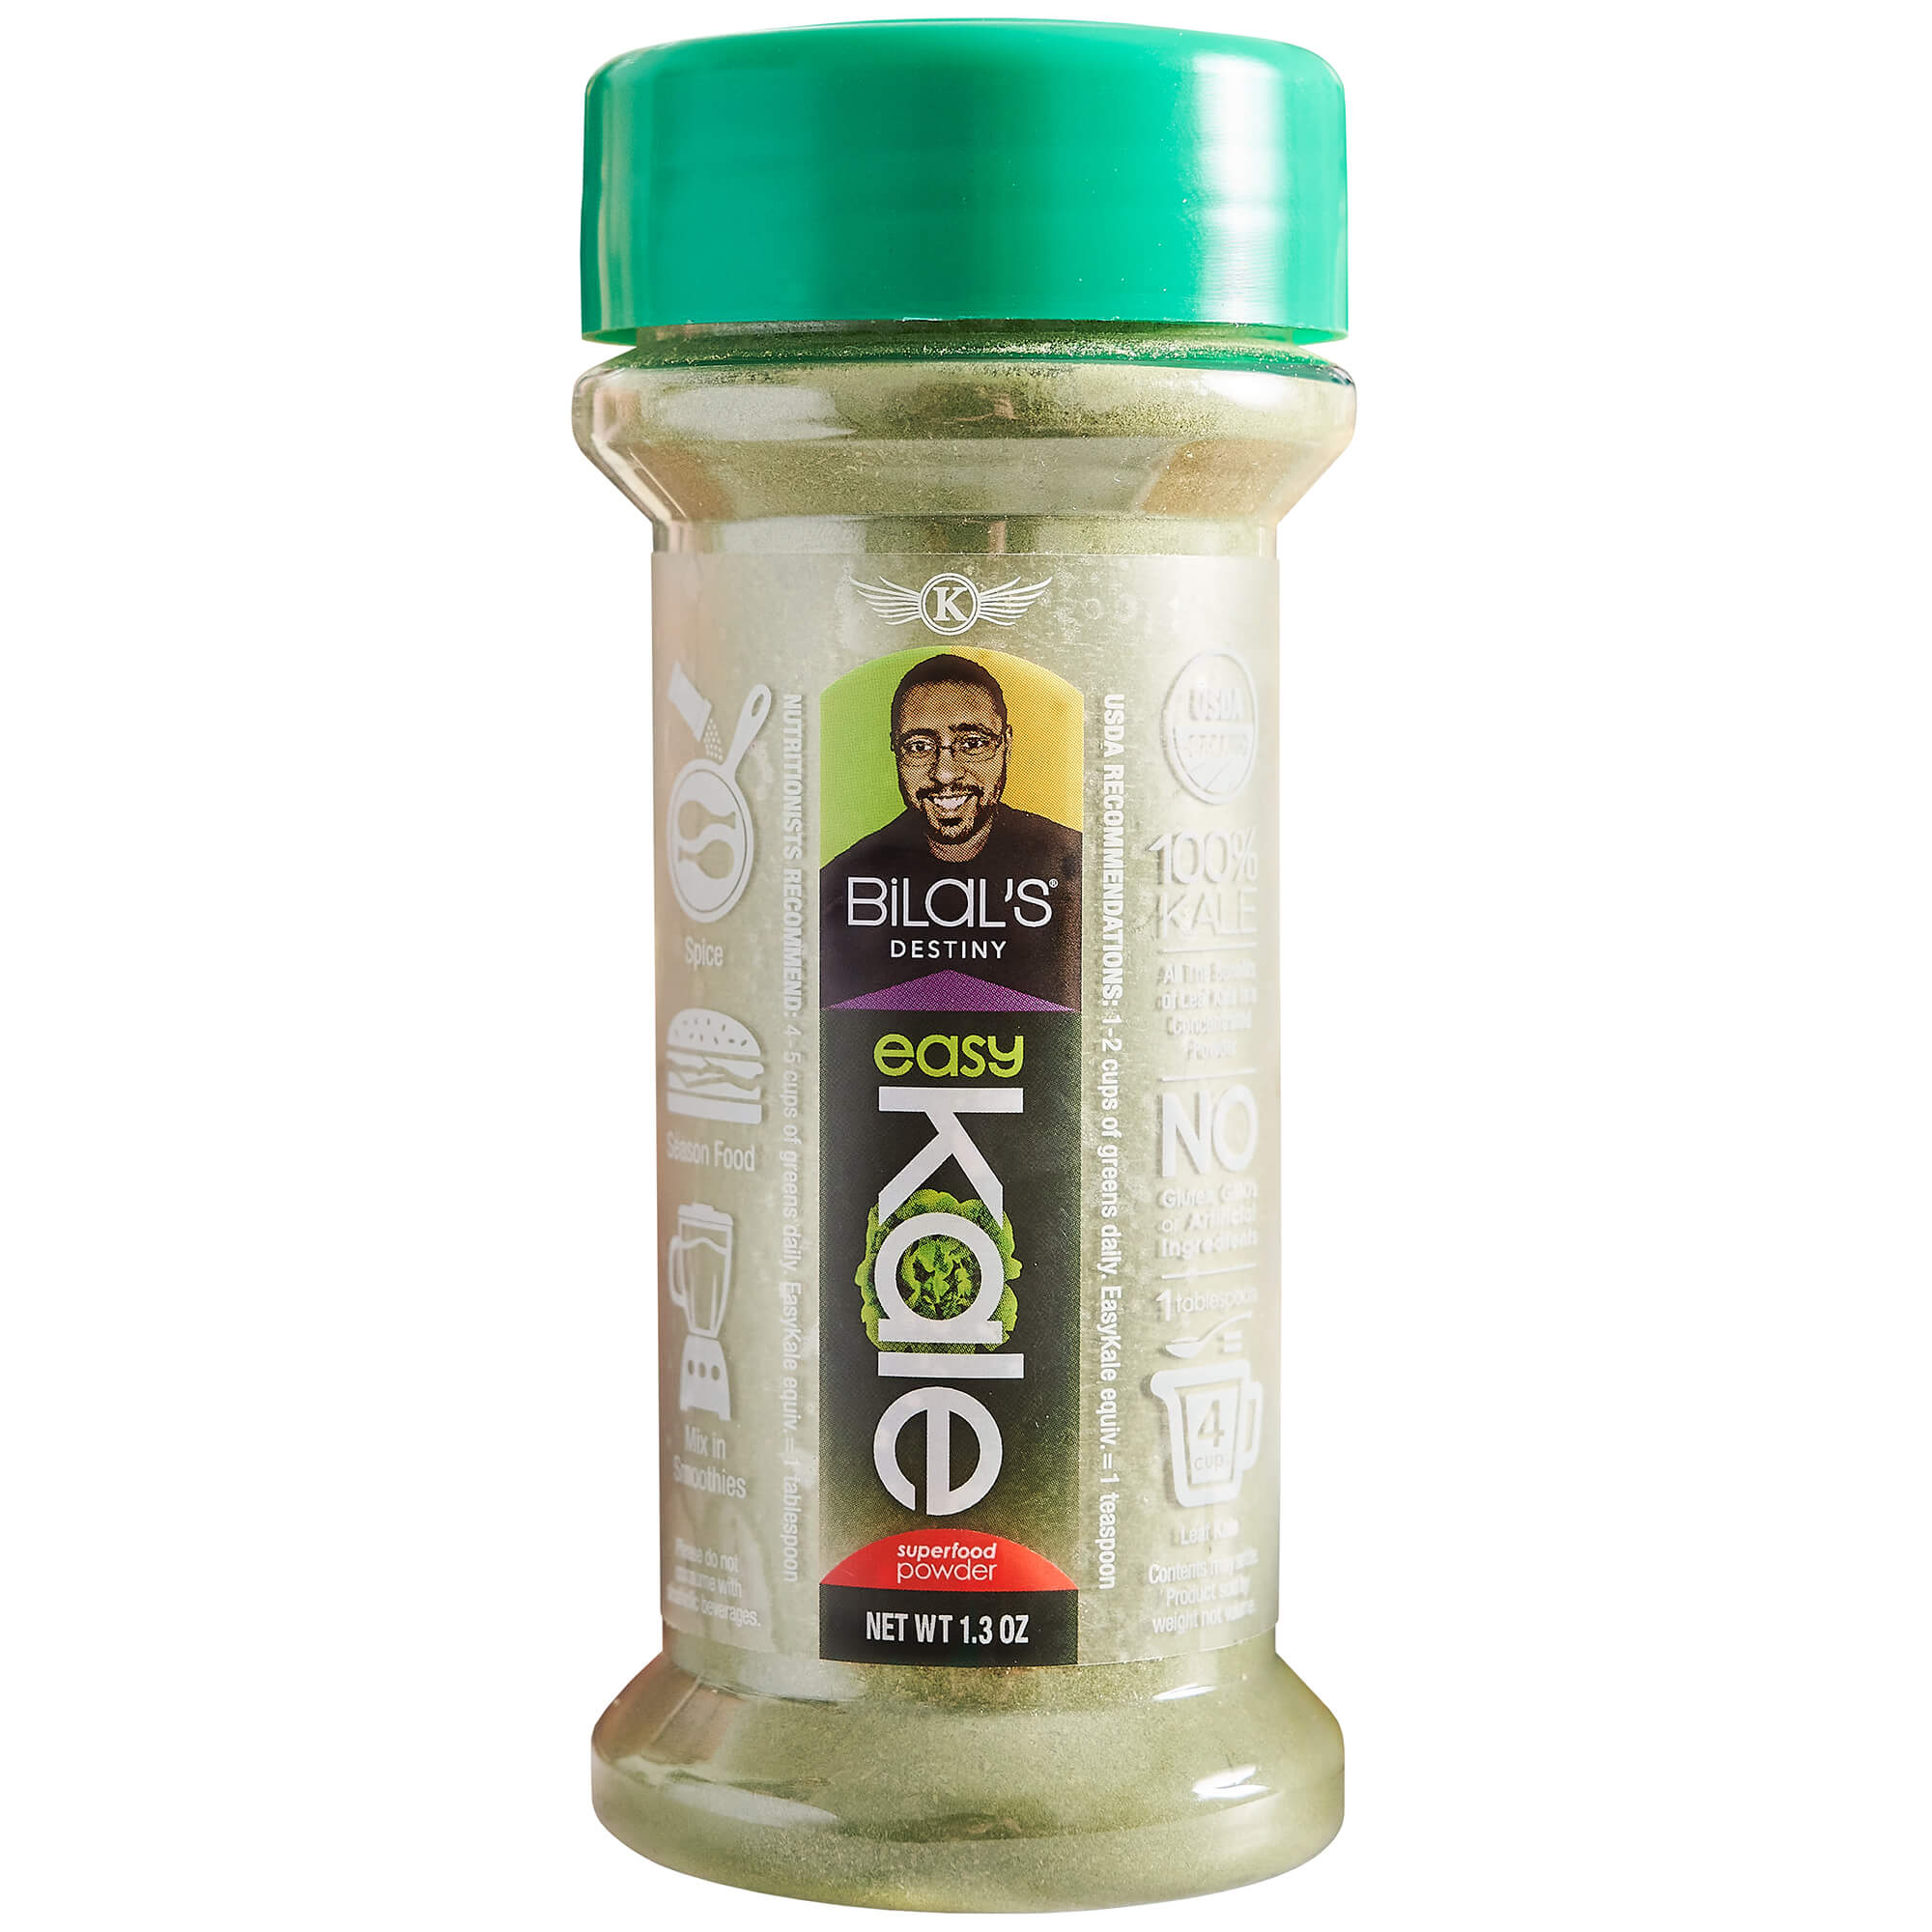 Isolated view of Bilal's EasyKale Tasteless Organic Kale Powder Shaker, a transparent container, against a white background, showcasing its transparent design and simplicity.